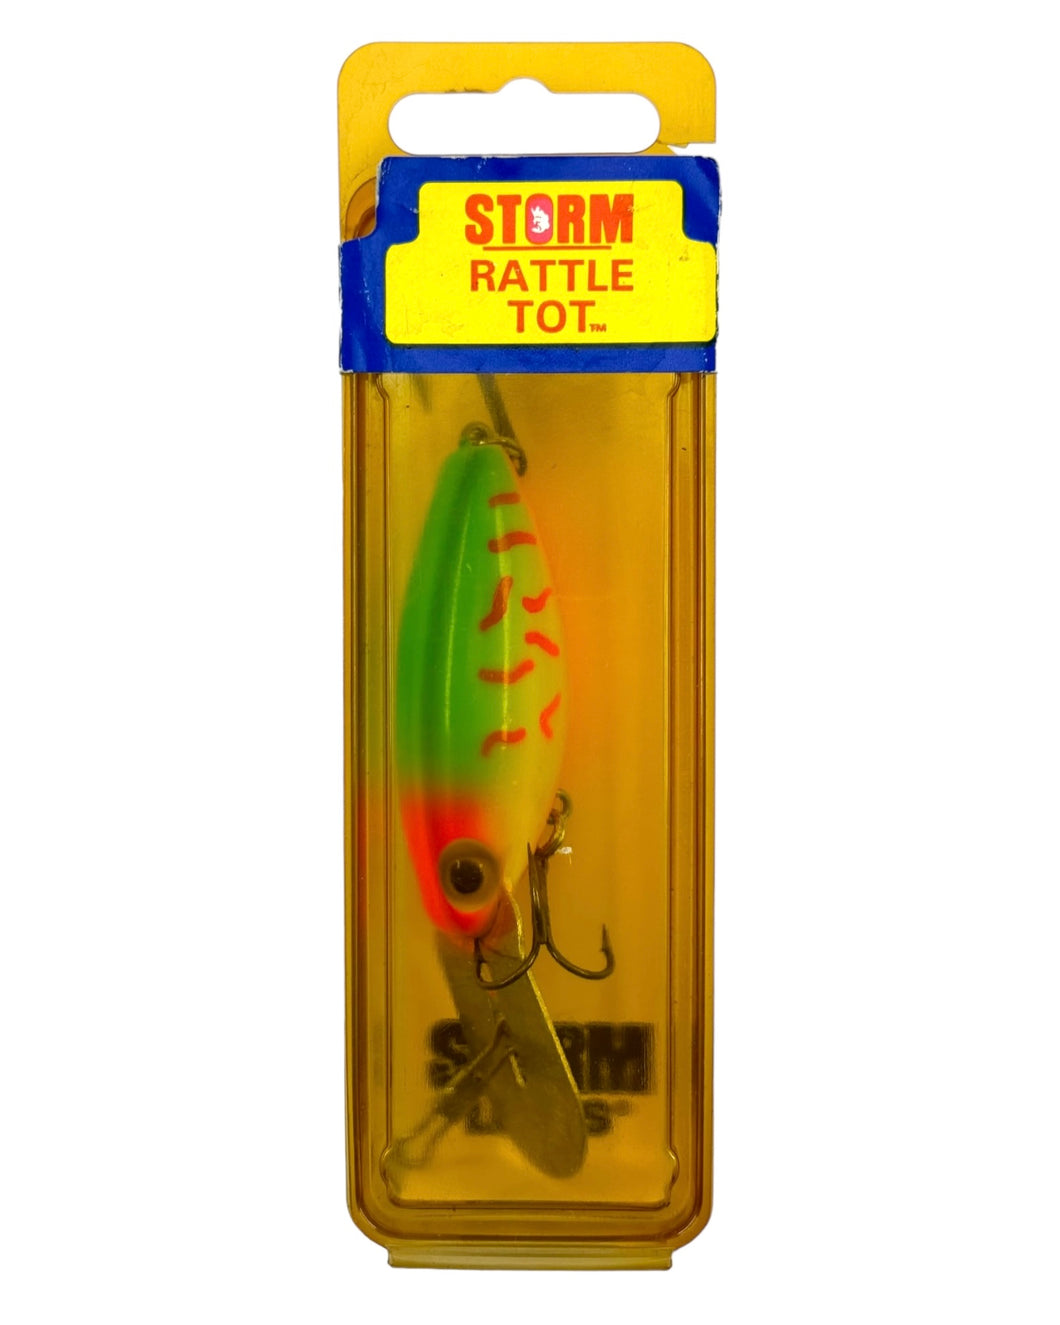 STORM LURES RATTLE TOT Fishing Lure in RED HOT TIGER